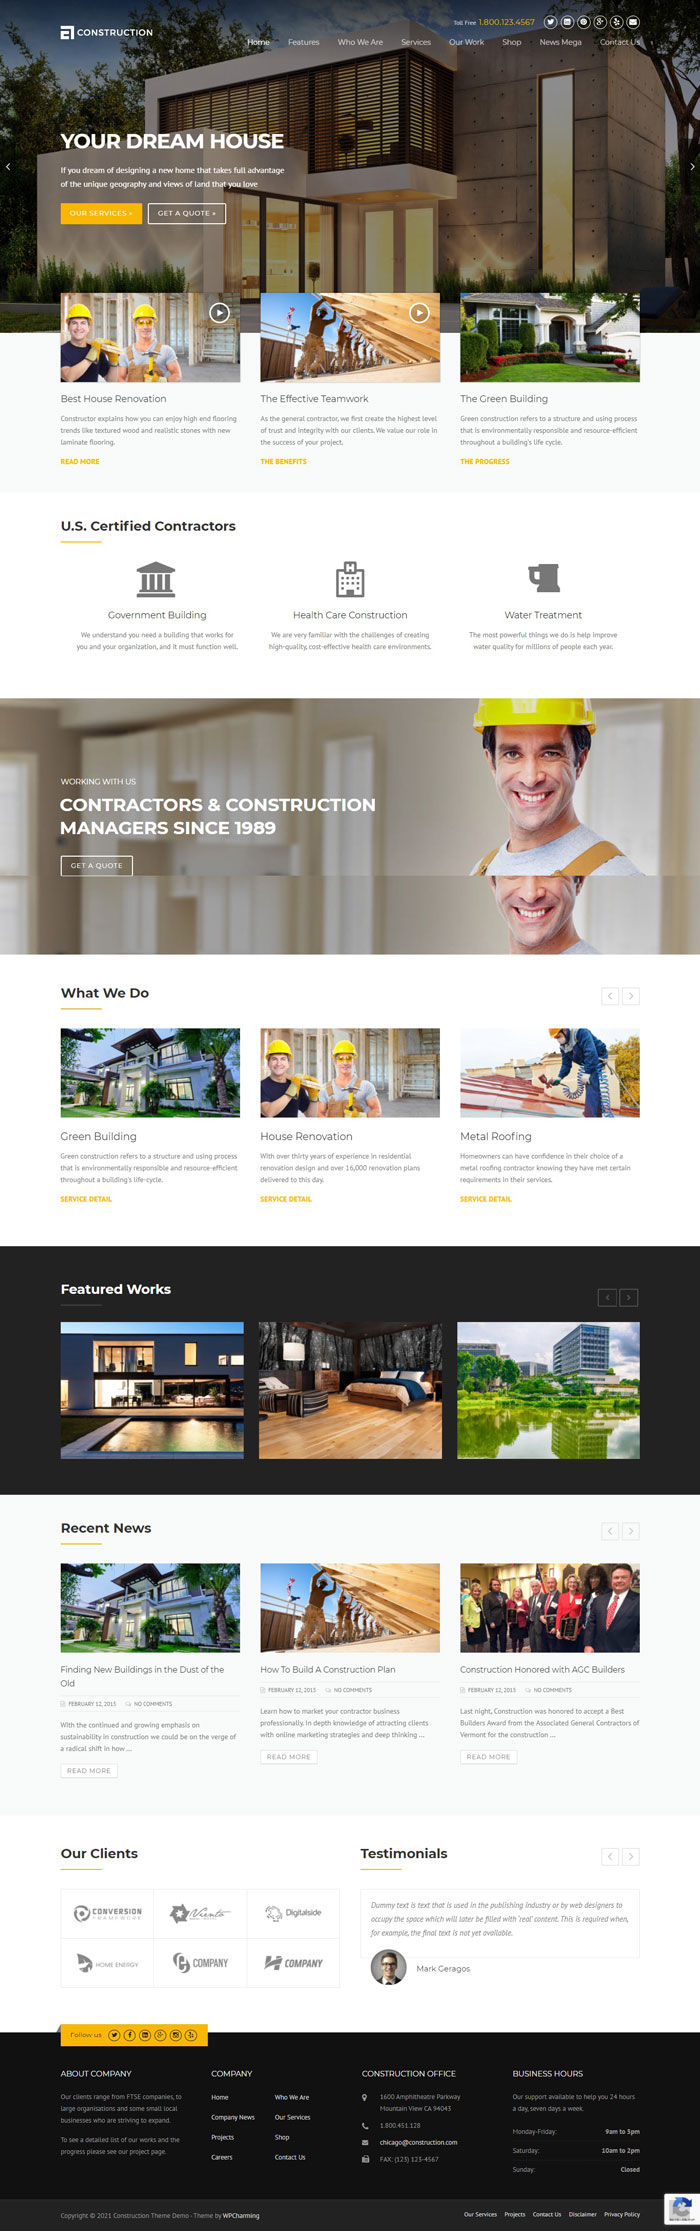 Mẫu Website Thiết Kế Xây Dựng - Construction